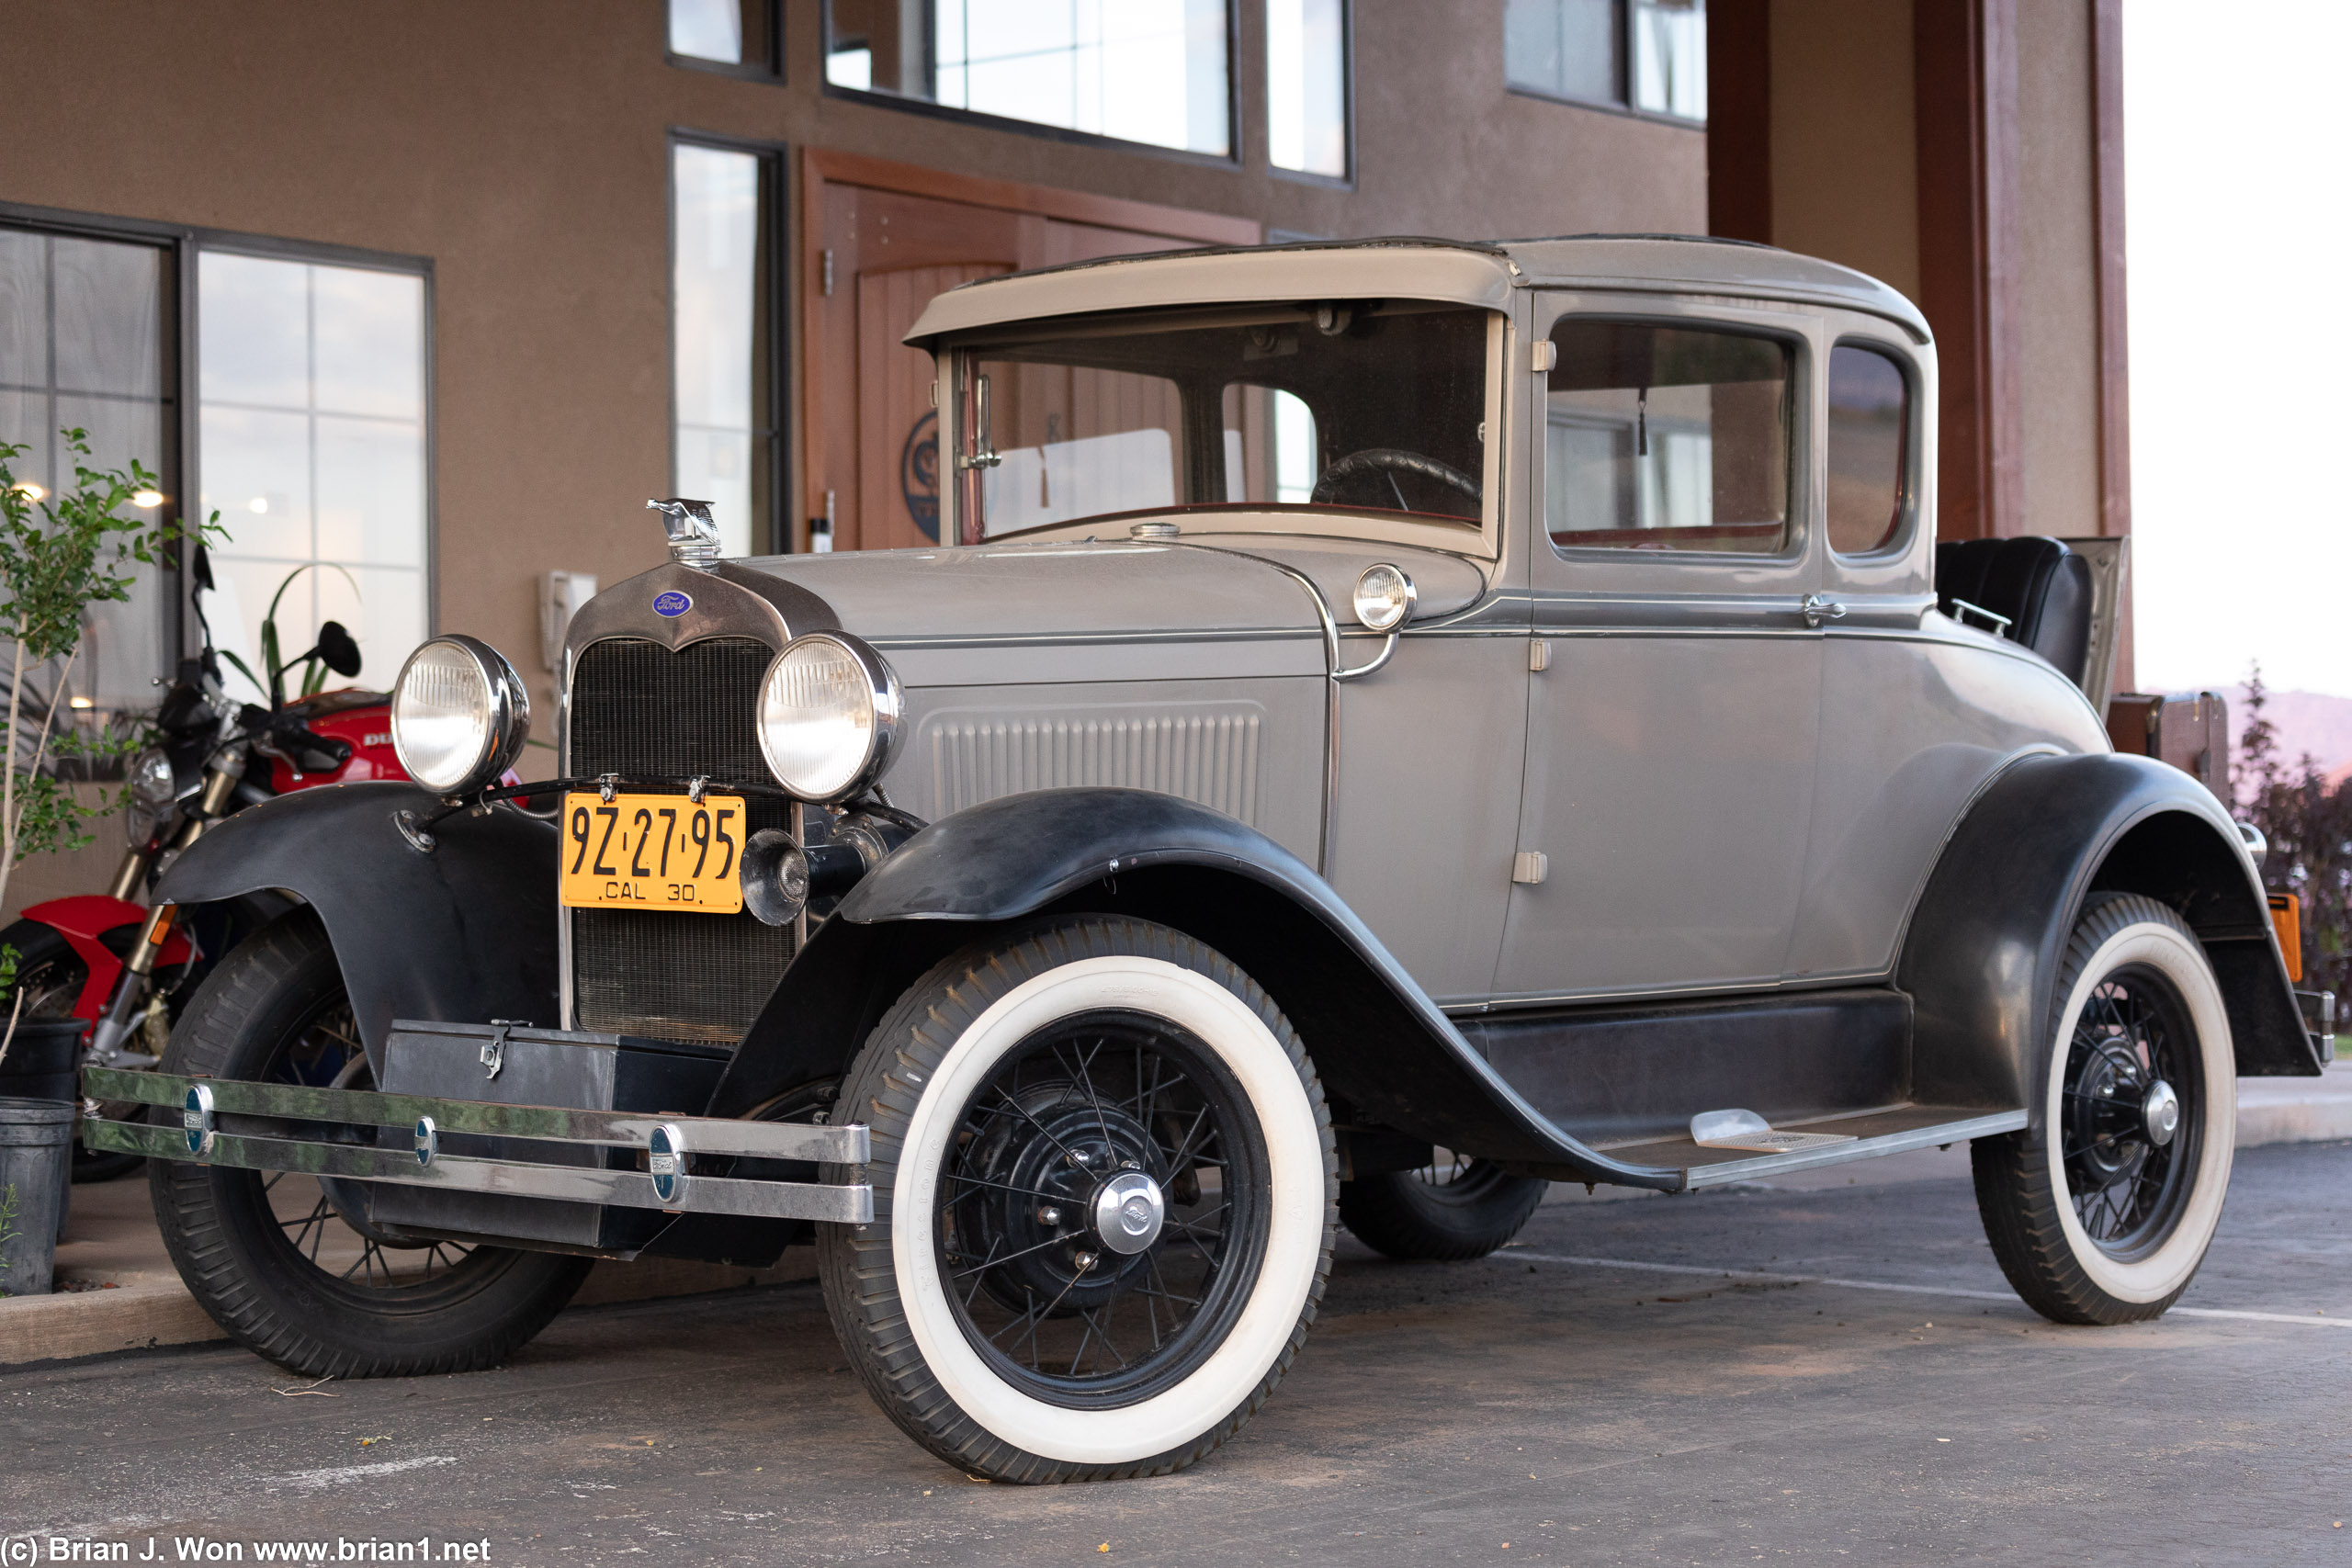 Noor Hotel's Ford Model T.